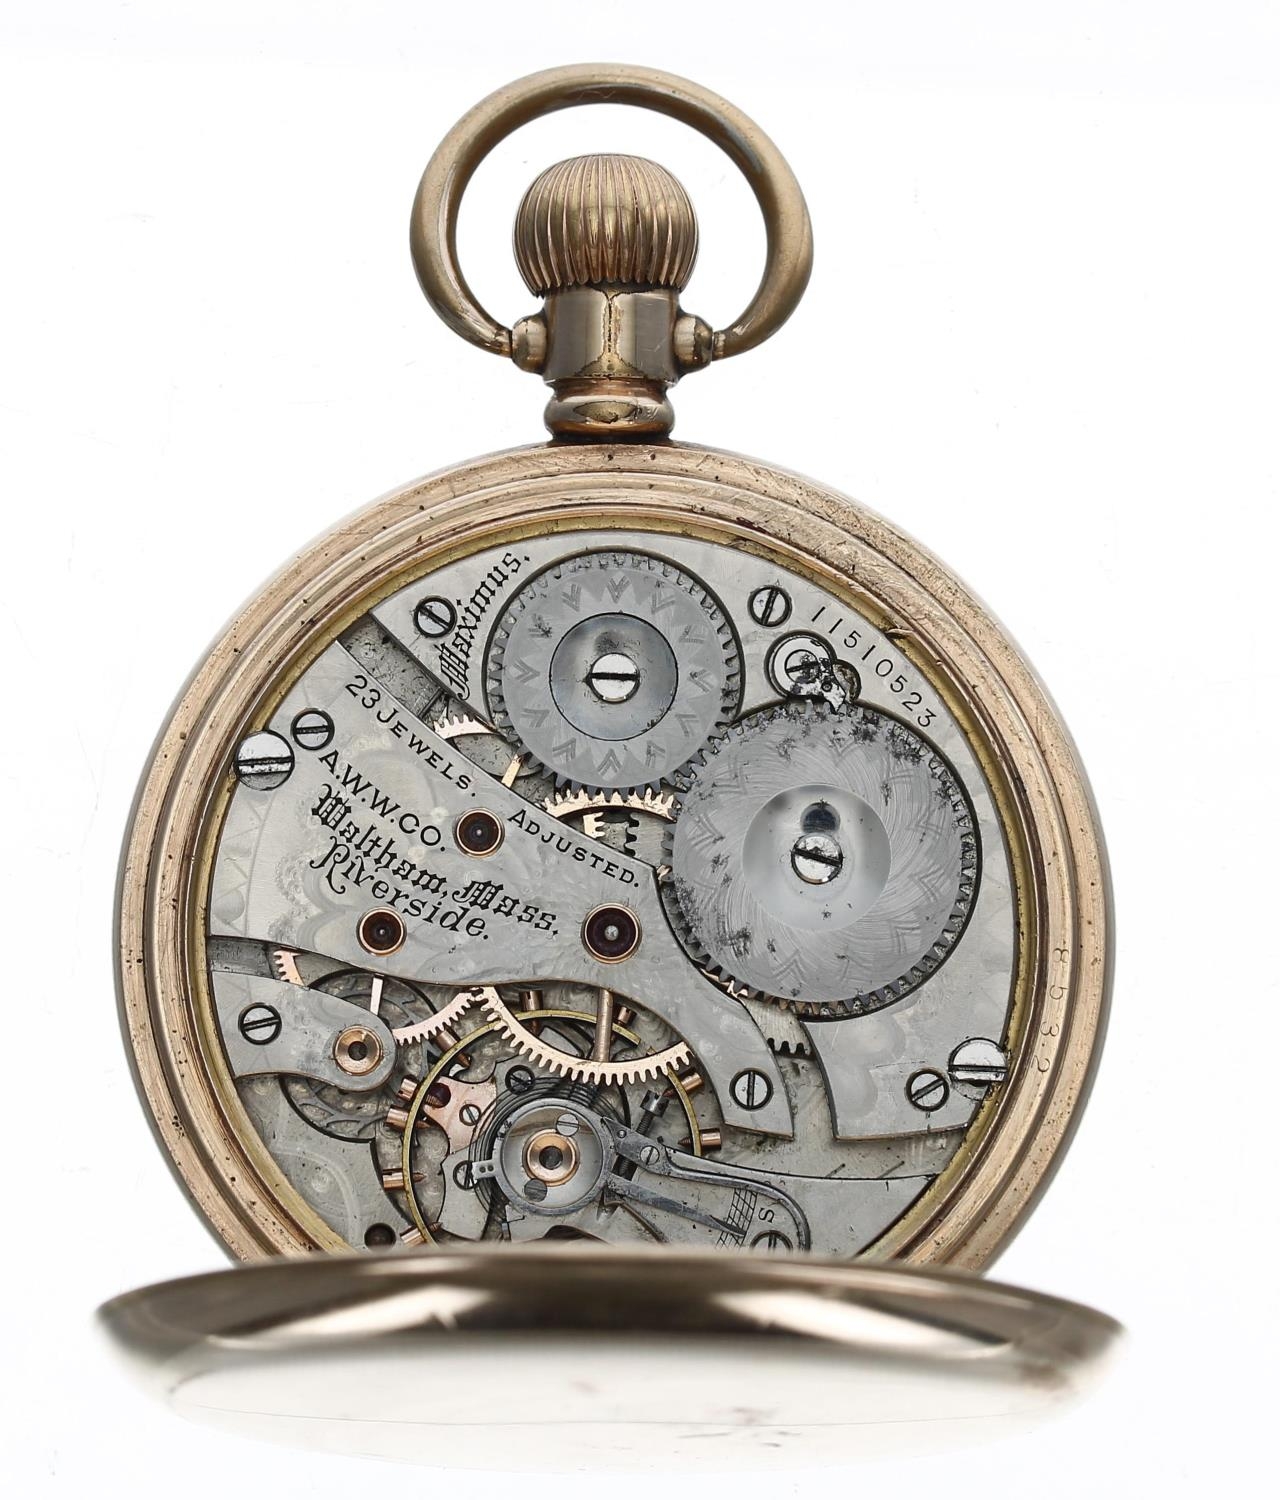 American Waltham 'Riverside Maximus' gold plated lever pocket watch, circa 1902, serial no. - Image 3 of 4